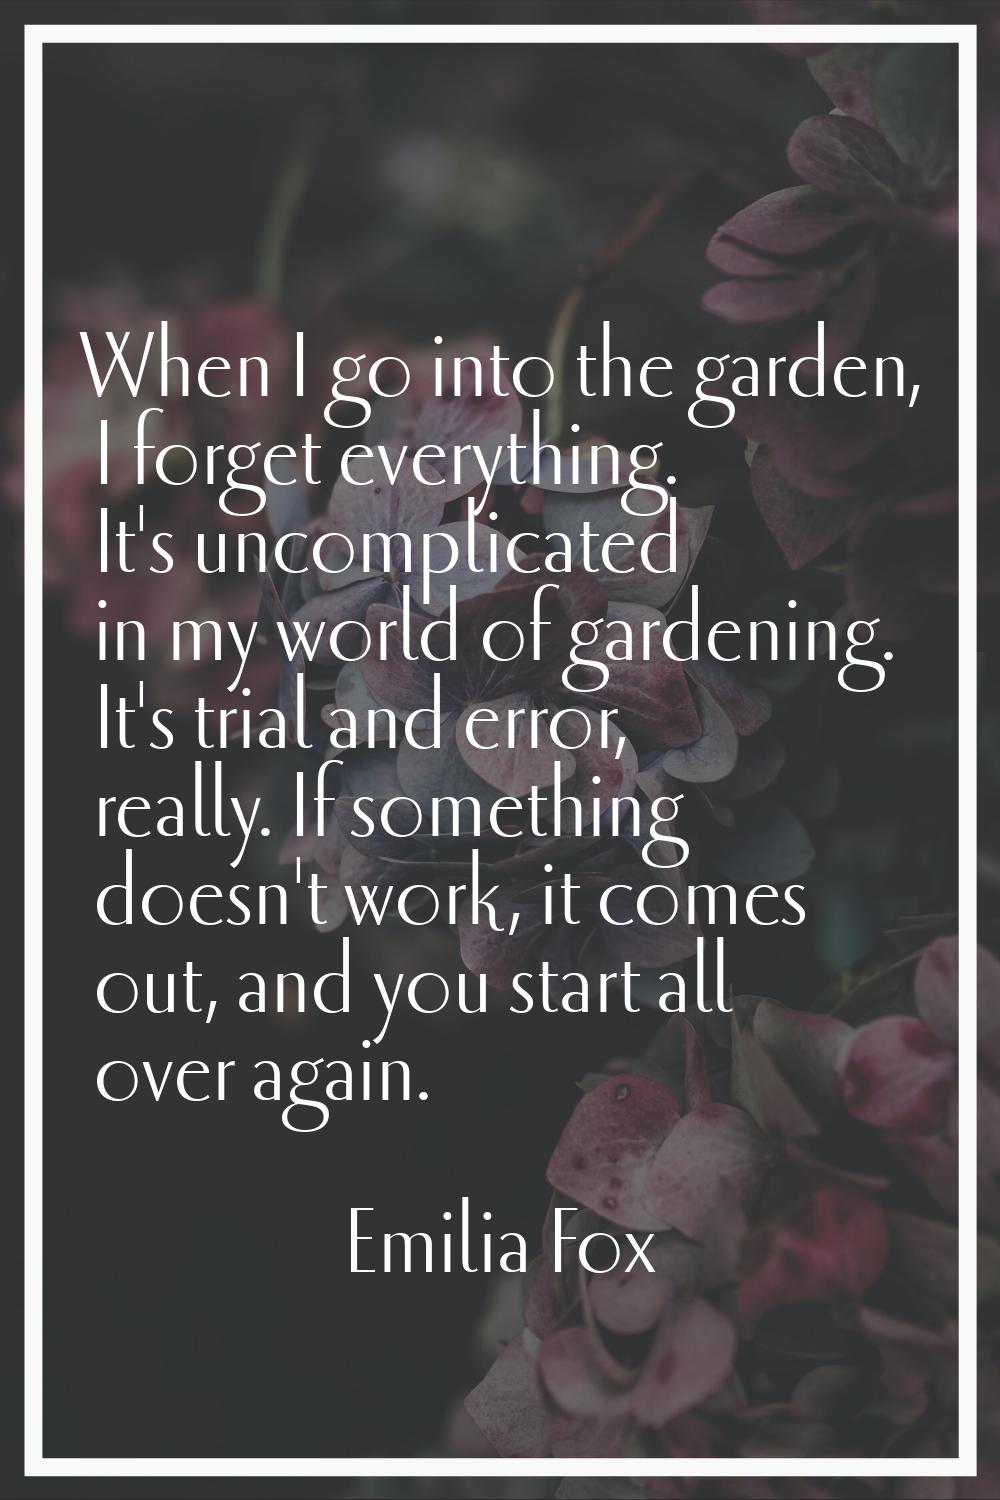 When I go into the garden, I forget everything. It's uncomplicated in my world of gardening. It's t